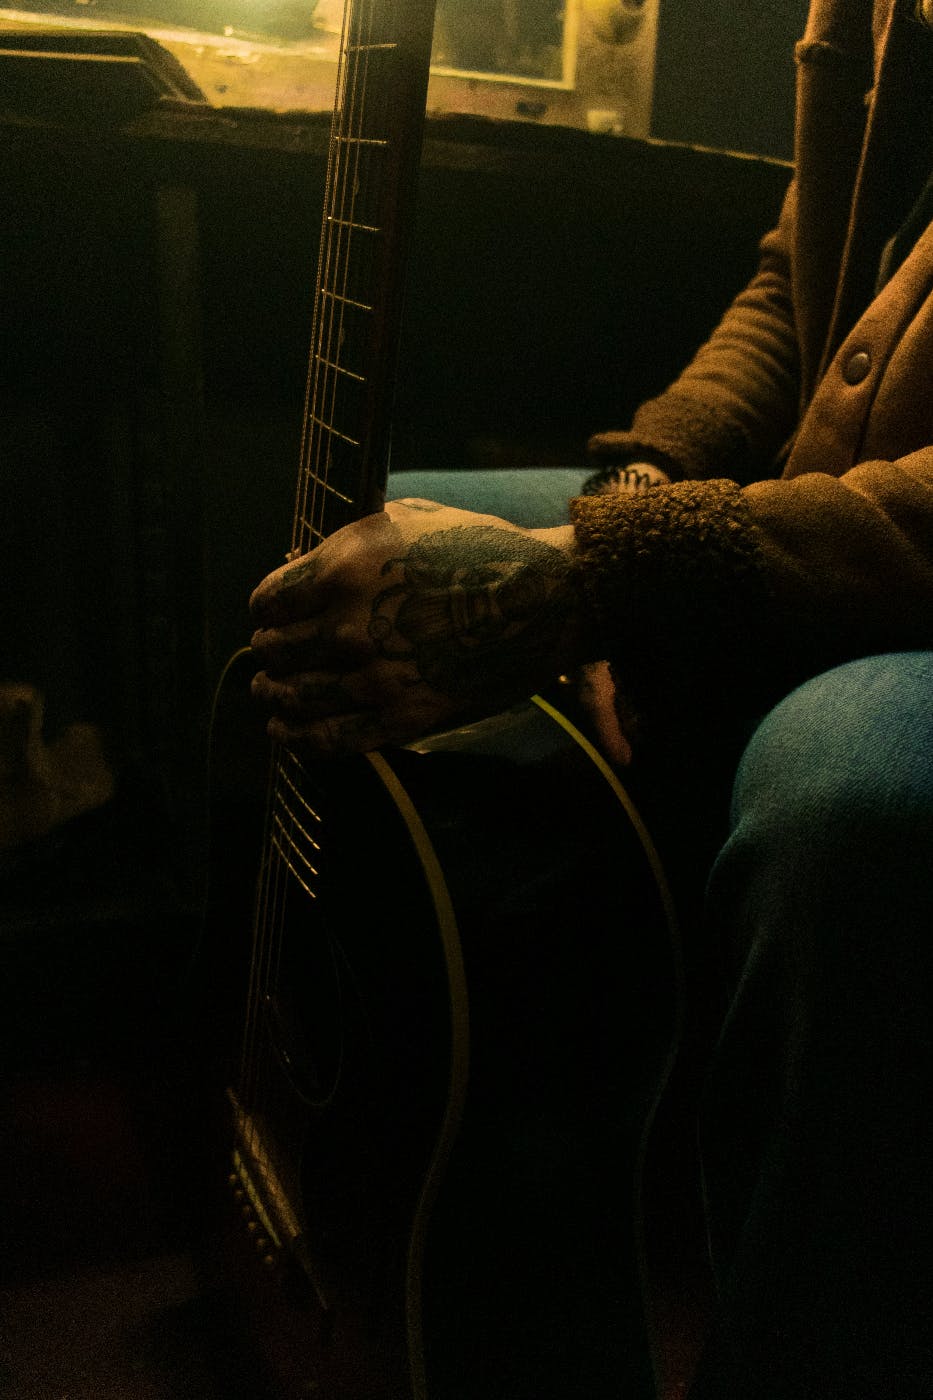 A man in a dimly lit room holding a guitar with a tattooed hand